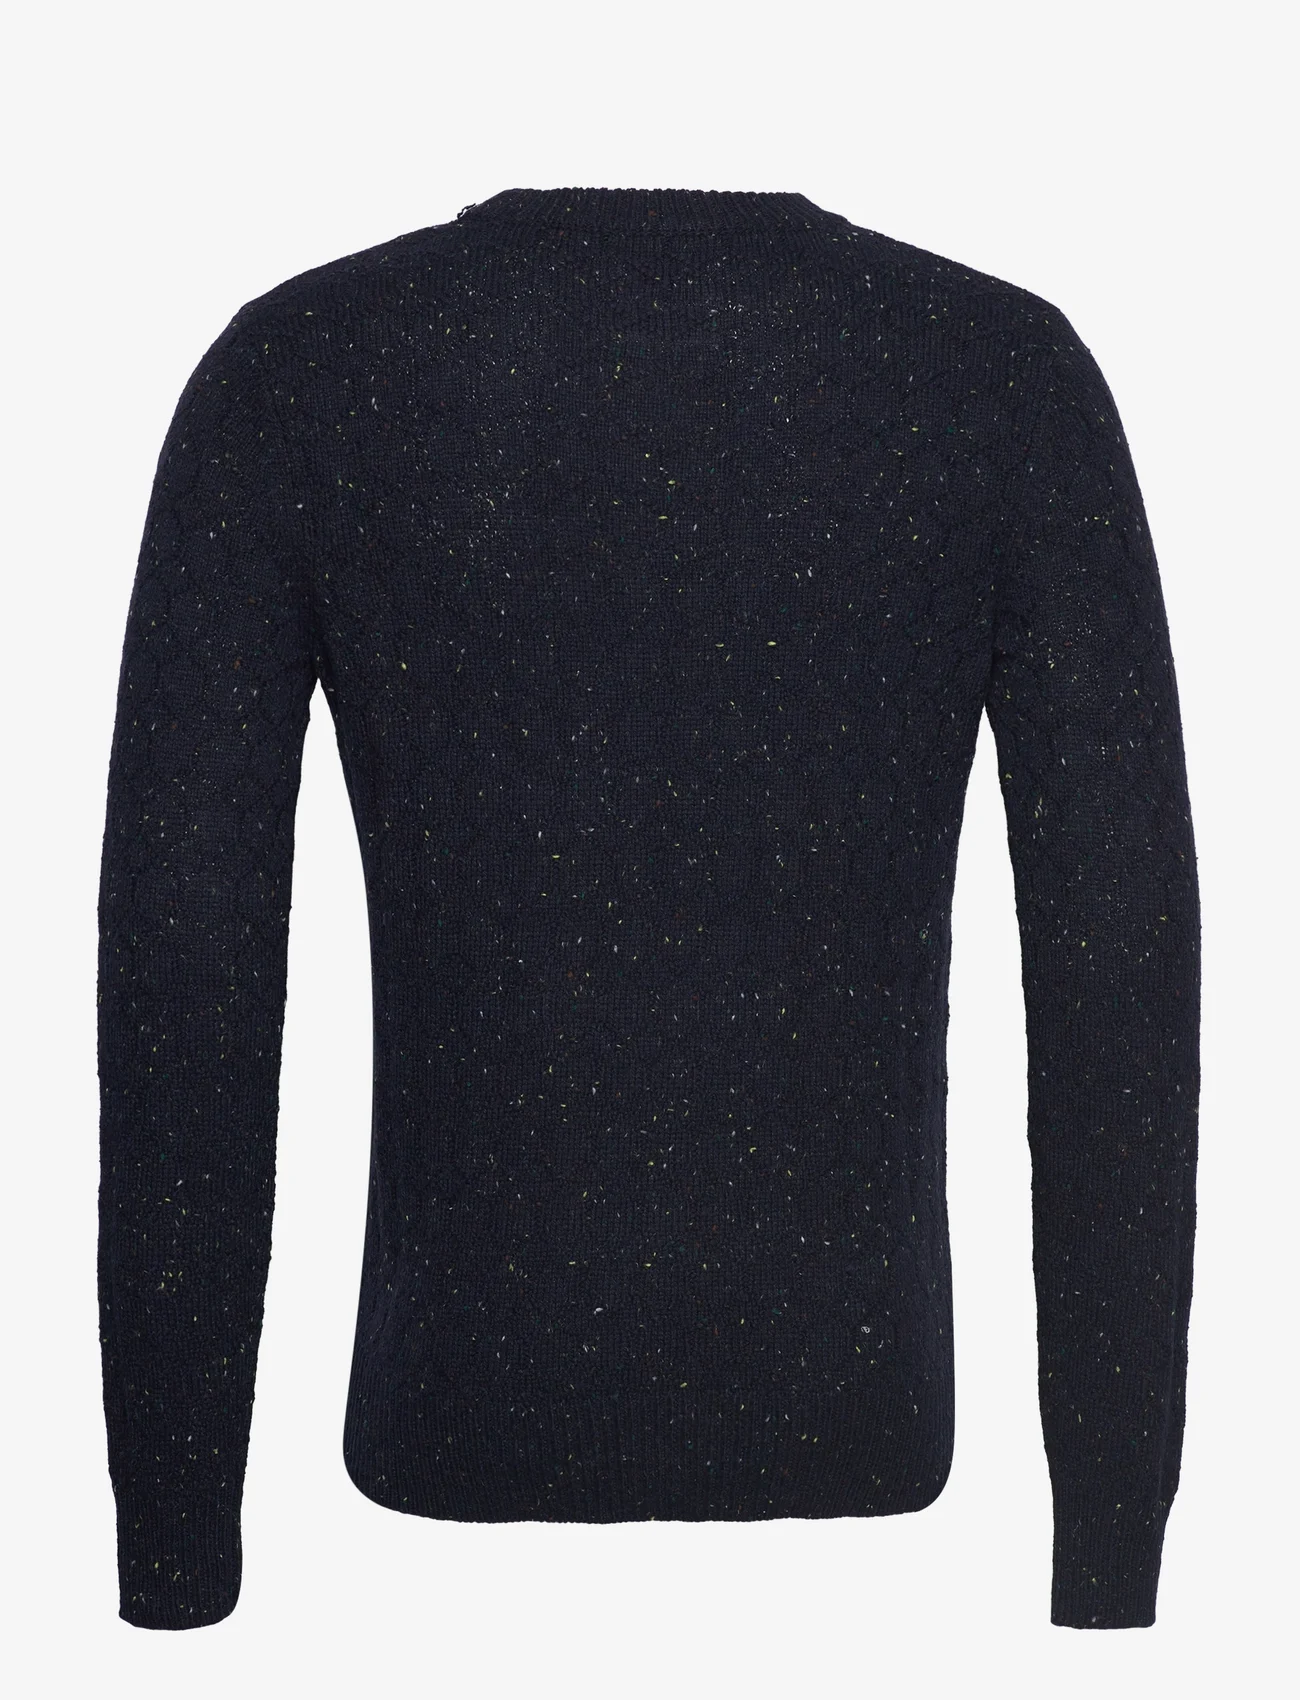 Tom Tailor - nep structured knit pullover - basic knitwear - navy melange nep structure - 1